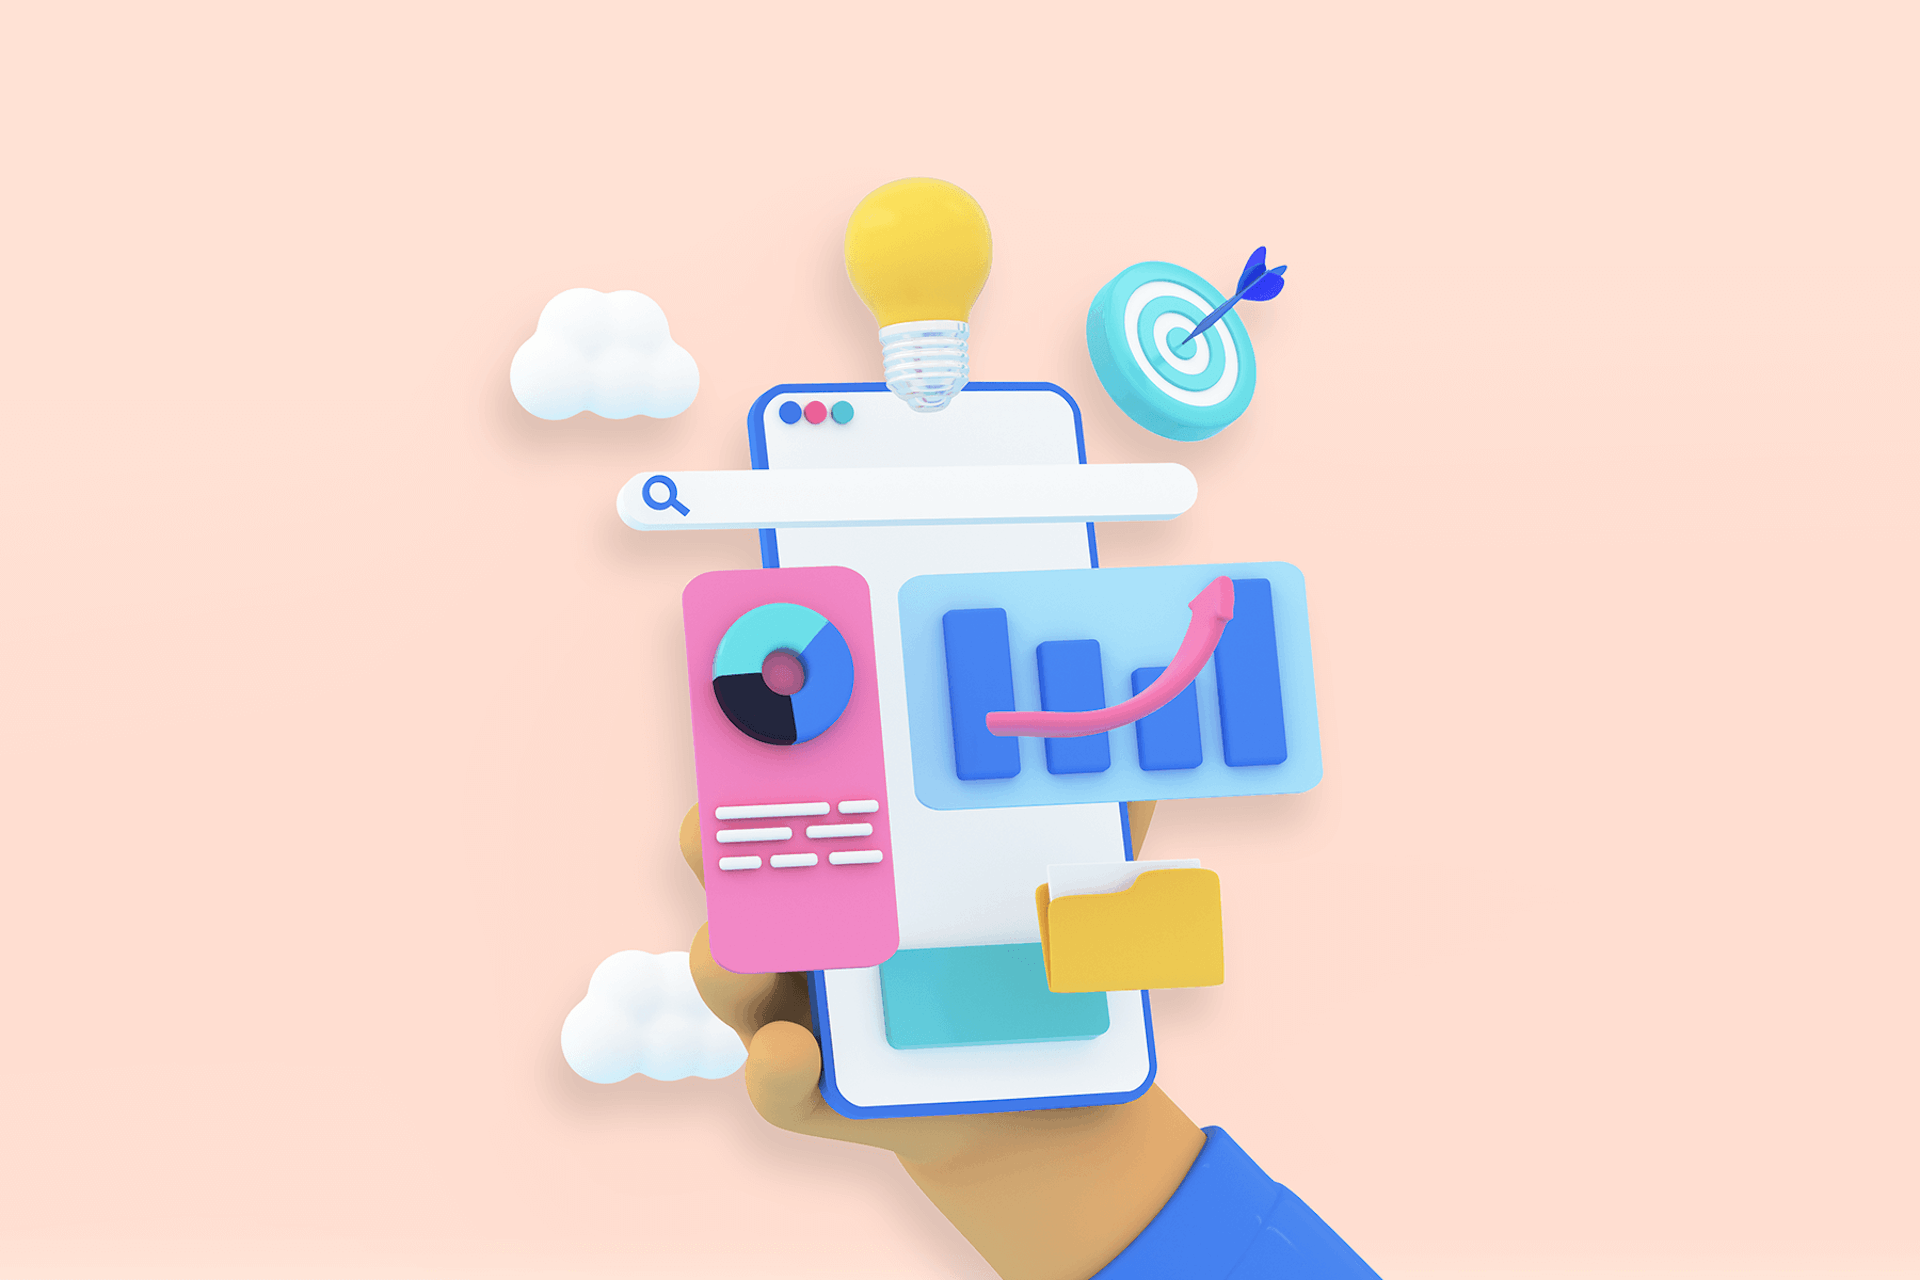 In illustration of a hand holding a smartphone with various charts and icons representing influencer campaign tracking.